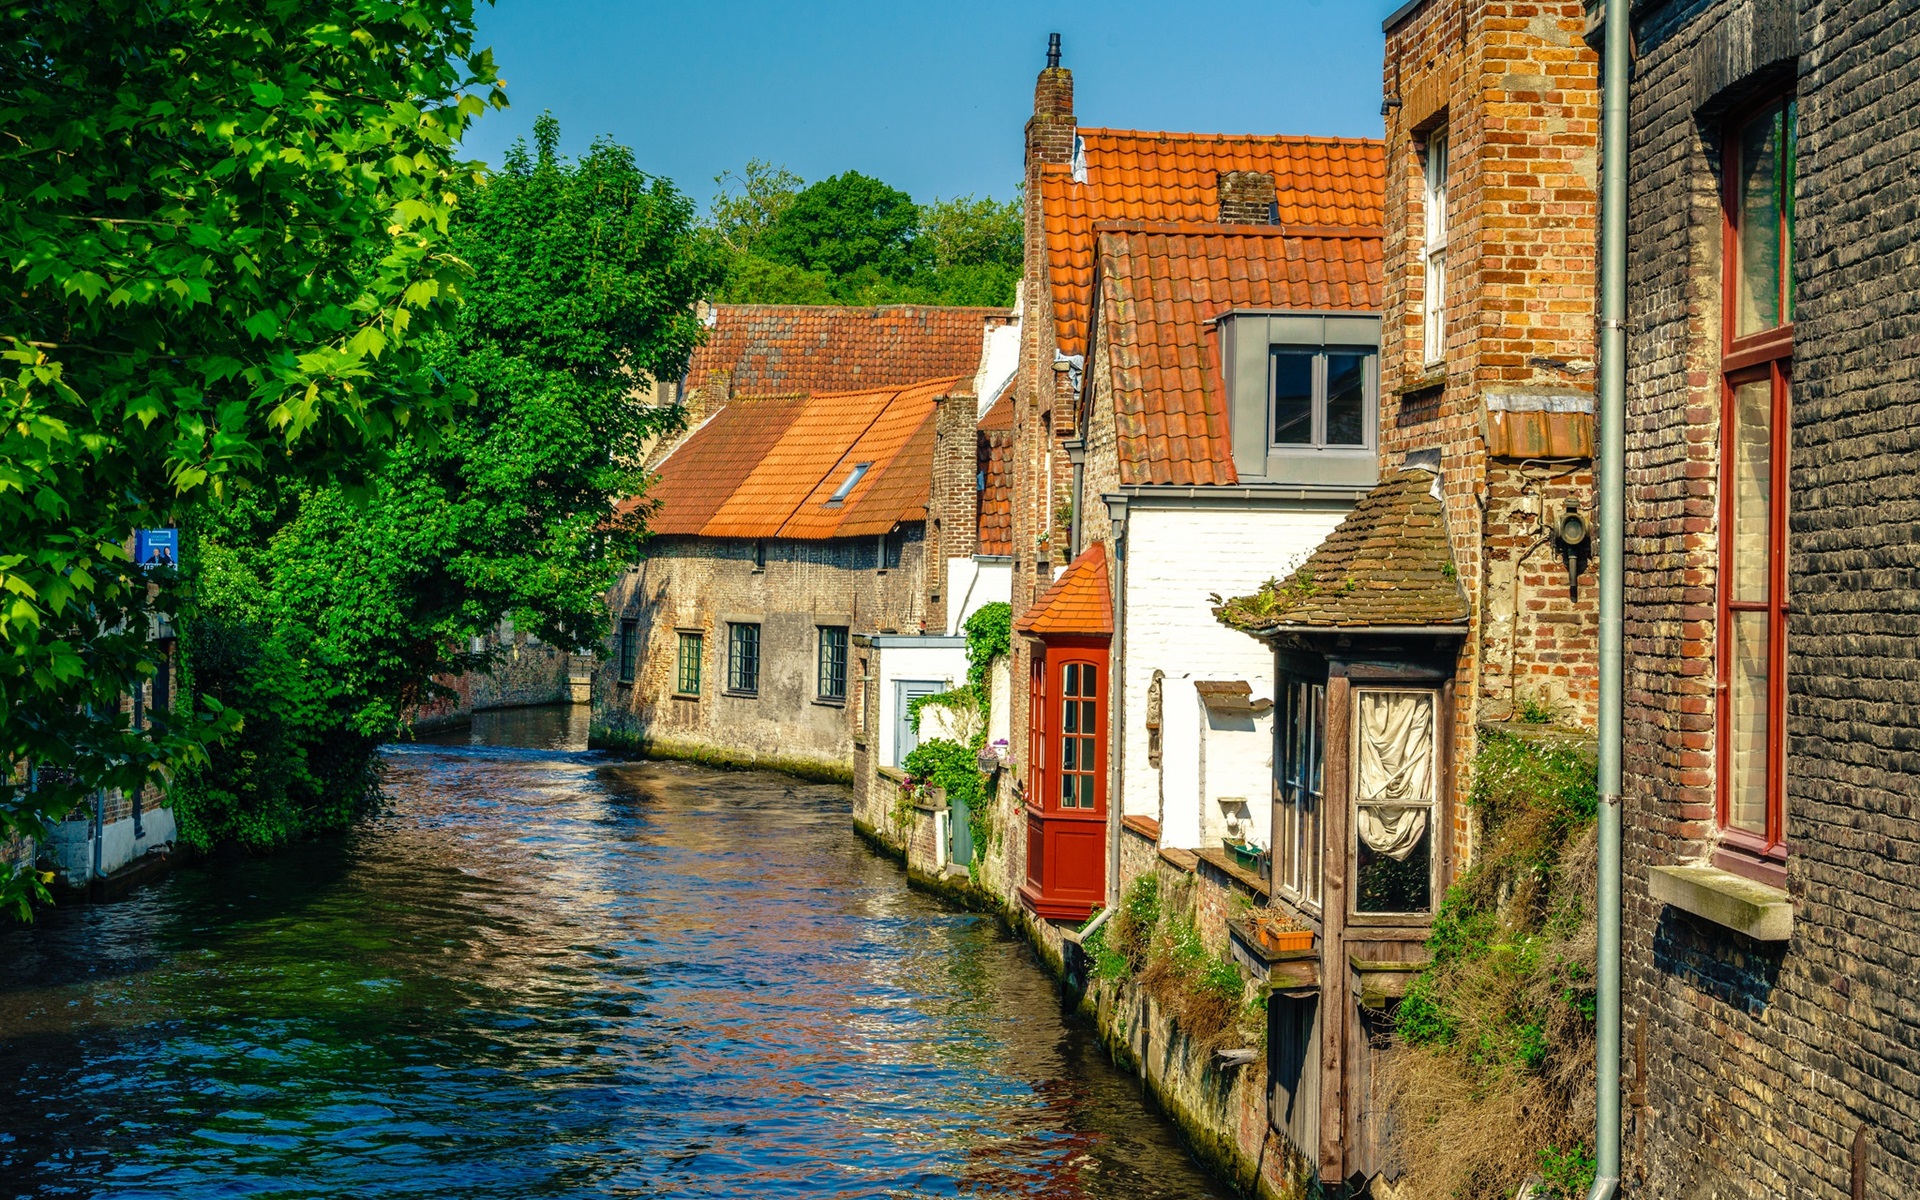 belgium, man made, town, bruges, canal, house, towns